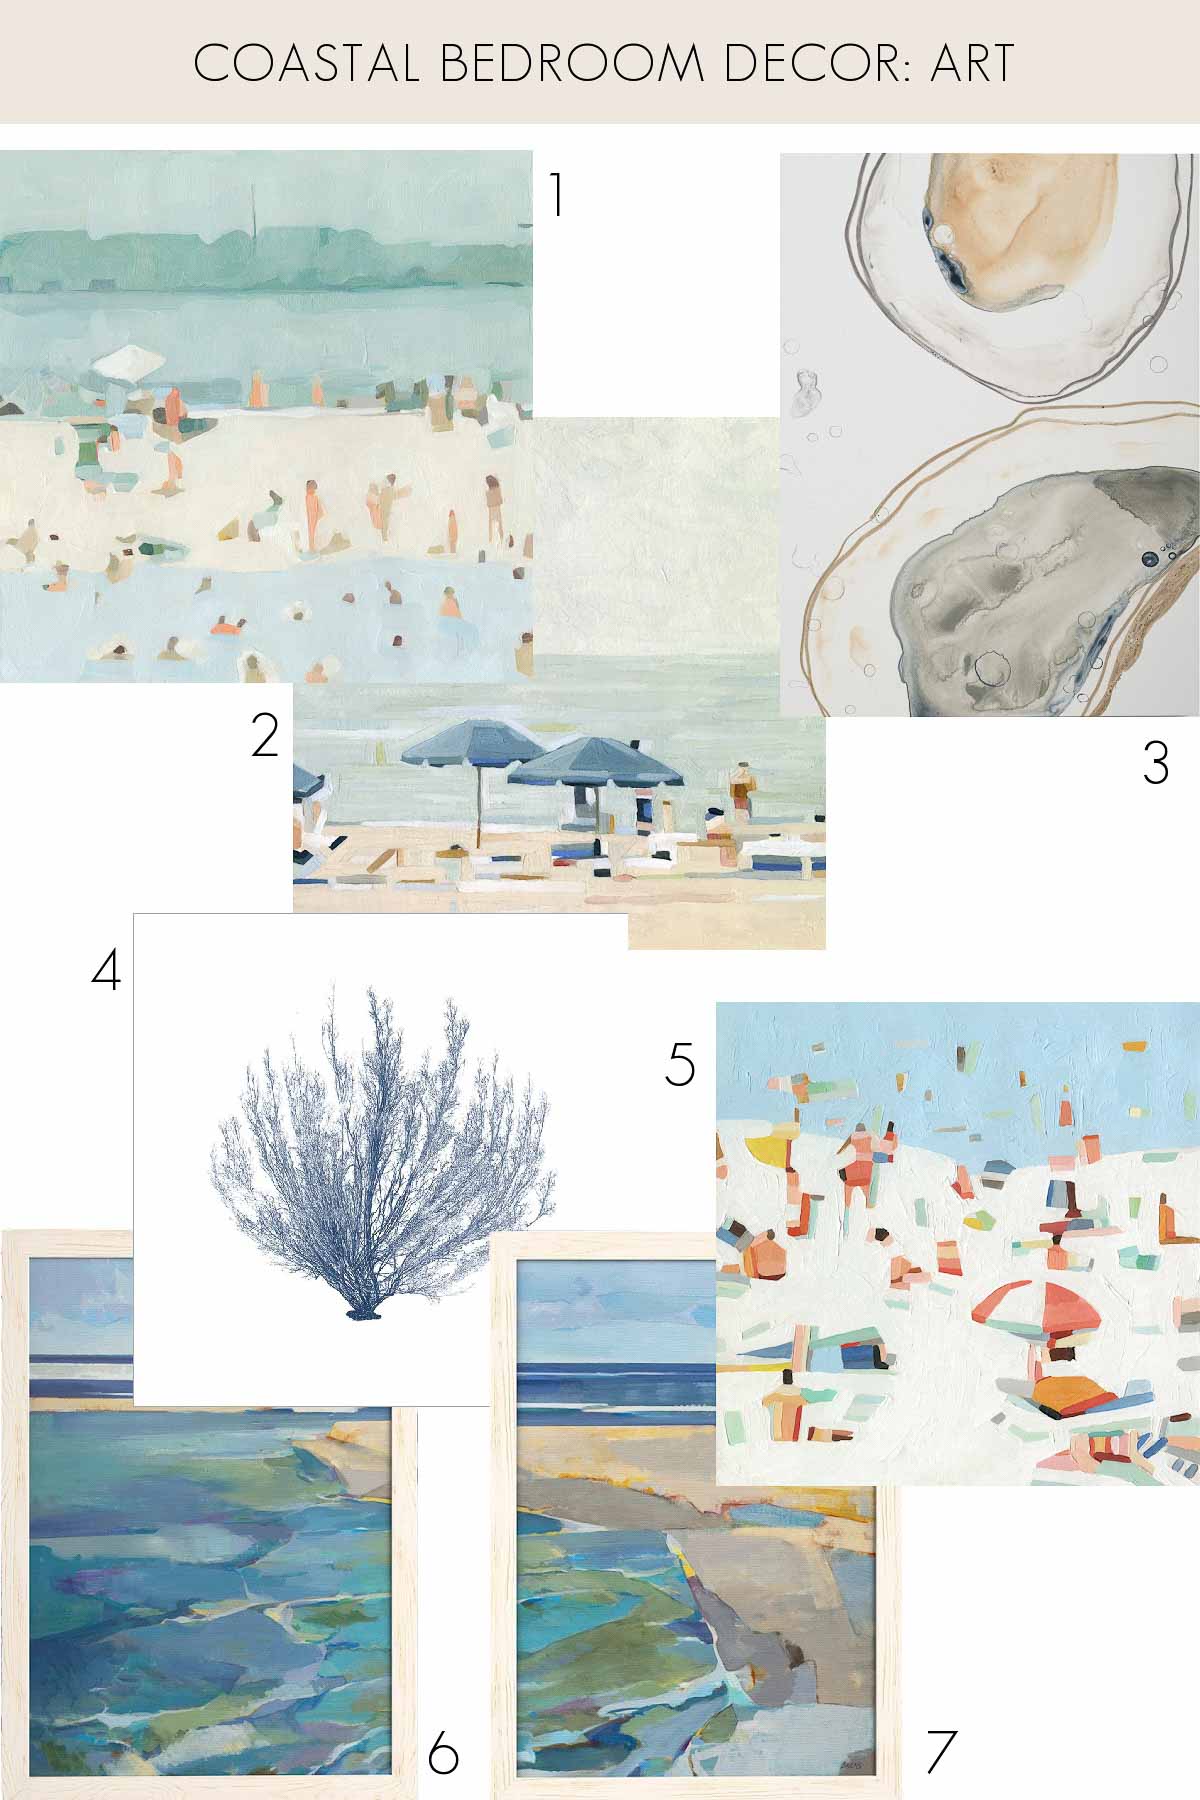 Seven art pieces with a coastal vibe that would work for coastal bedroom decor